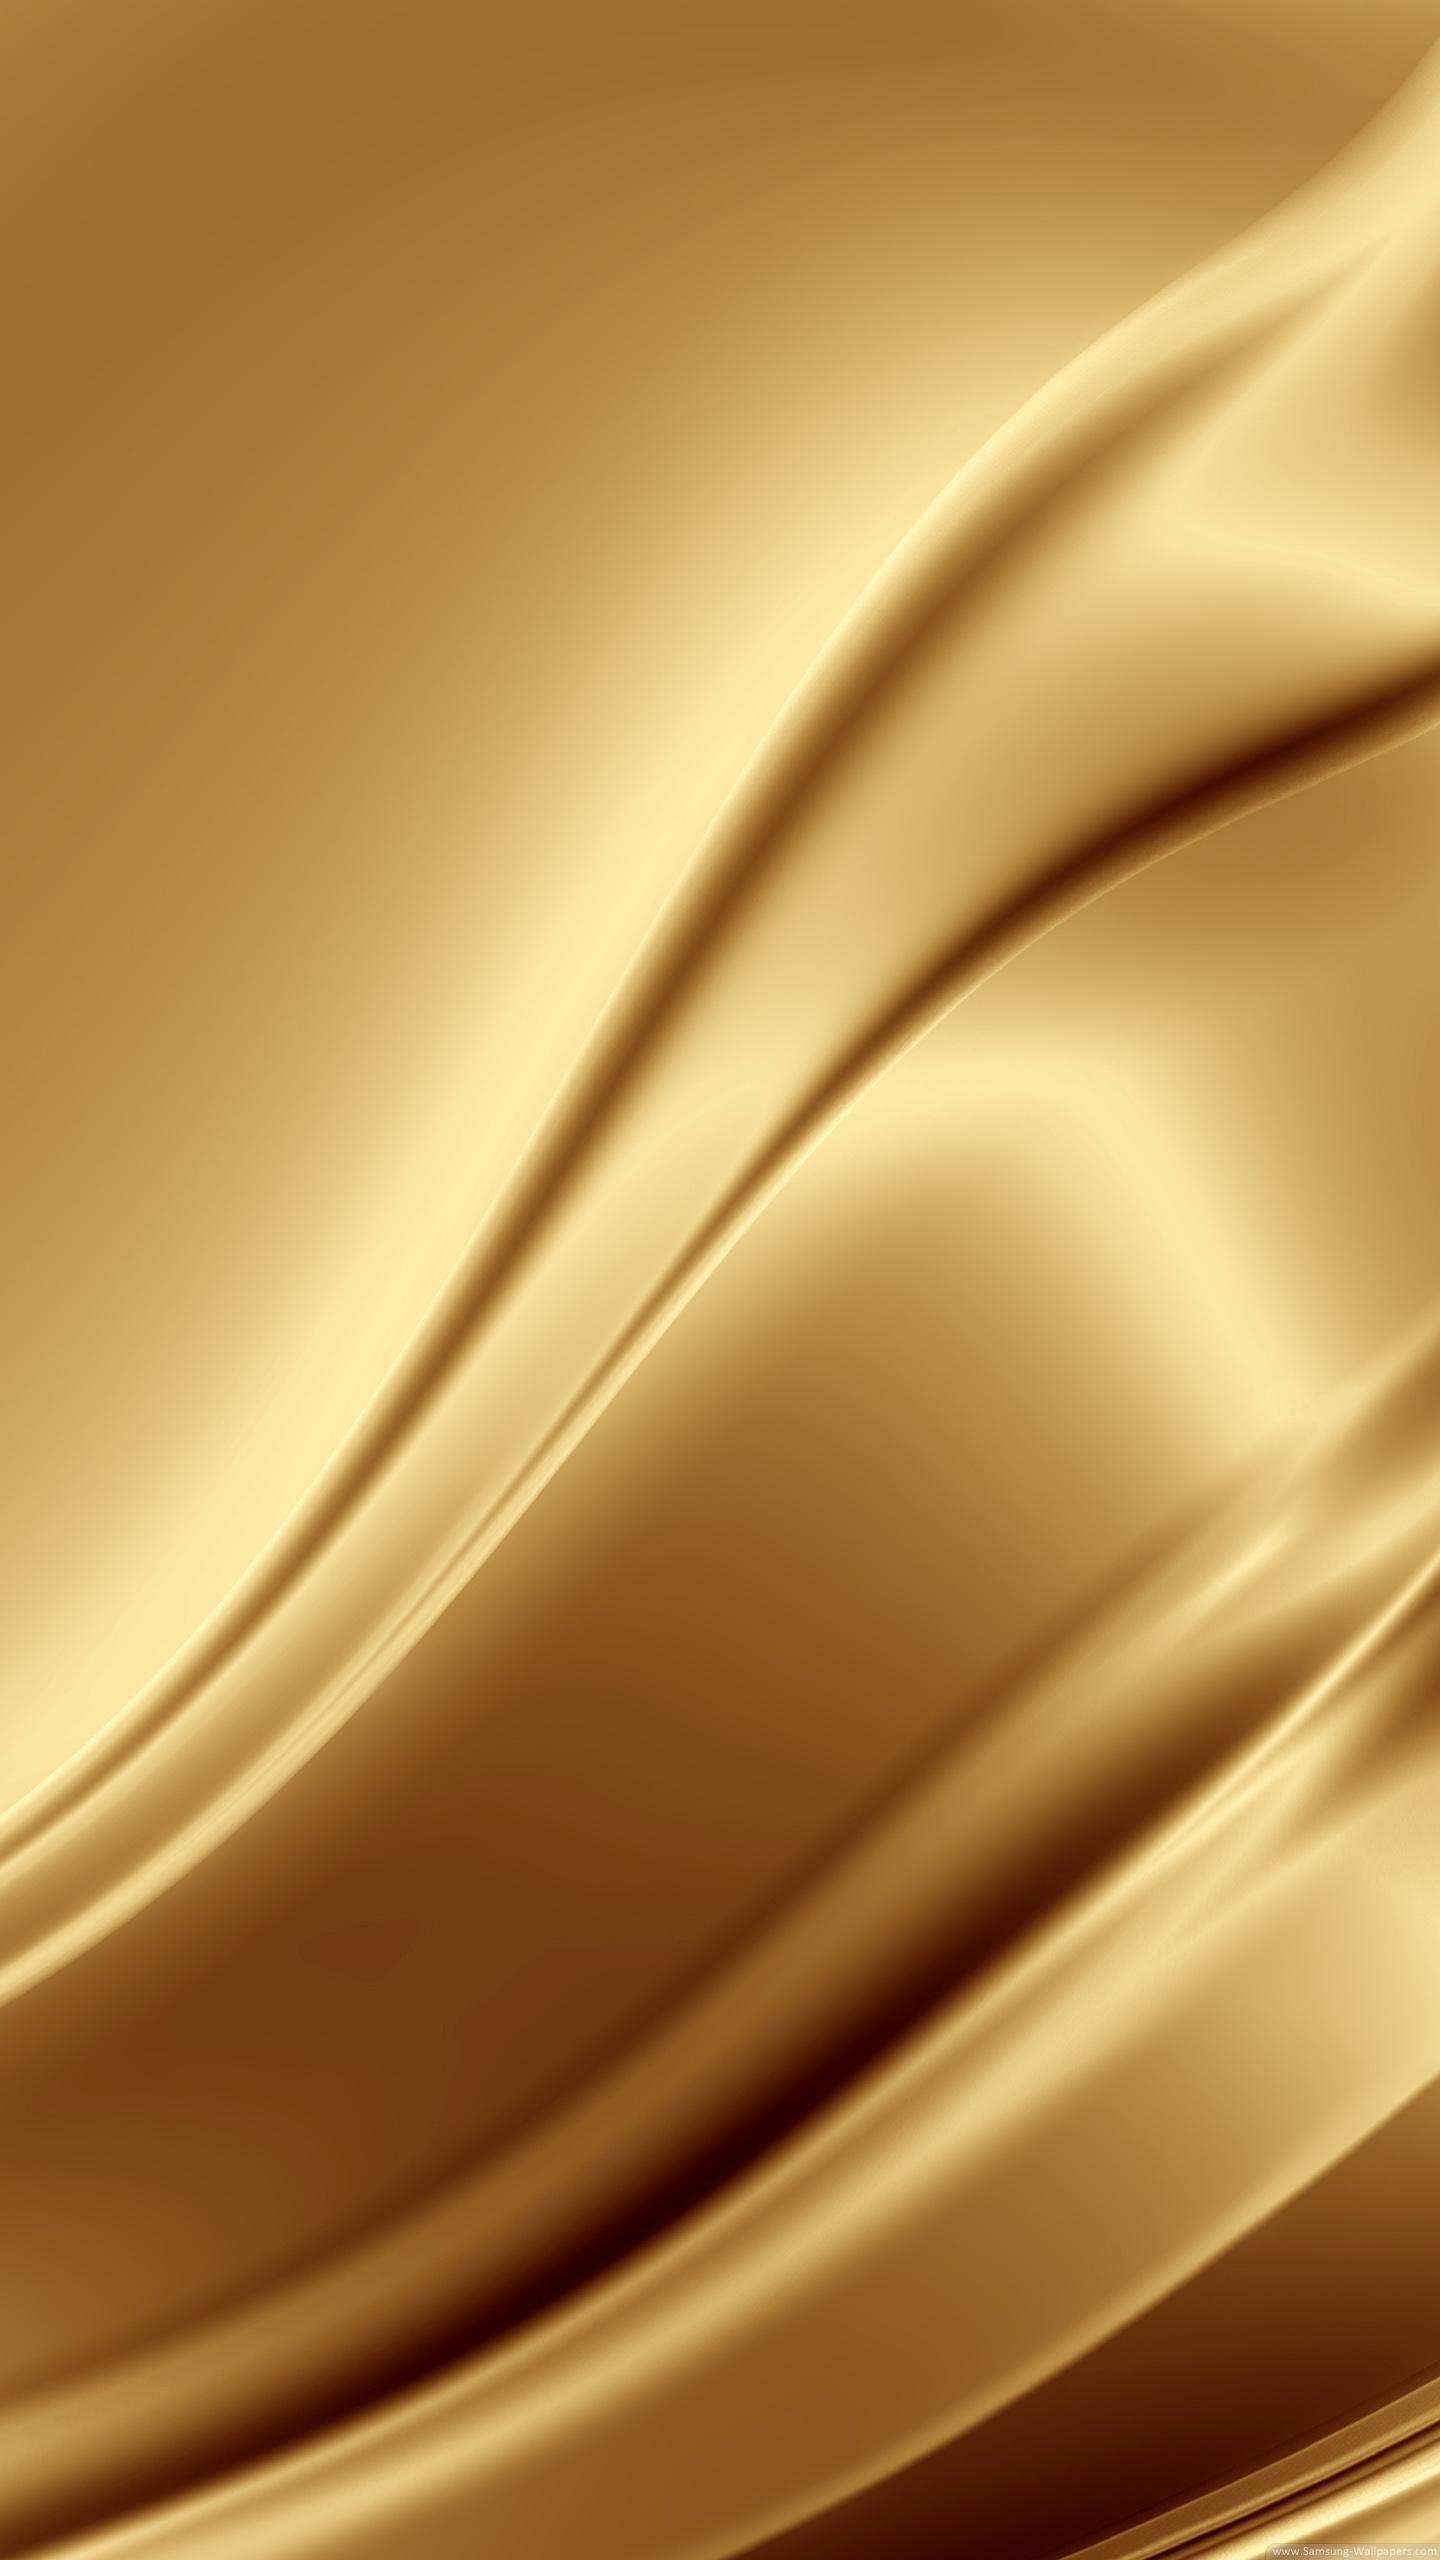 Wallpaper For Galaxy S6 Edge Gold image